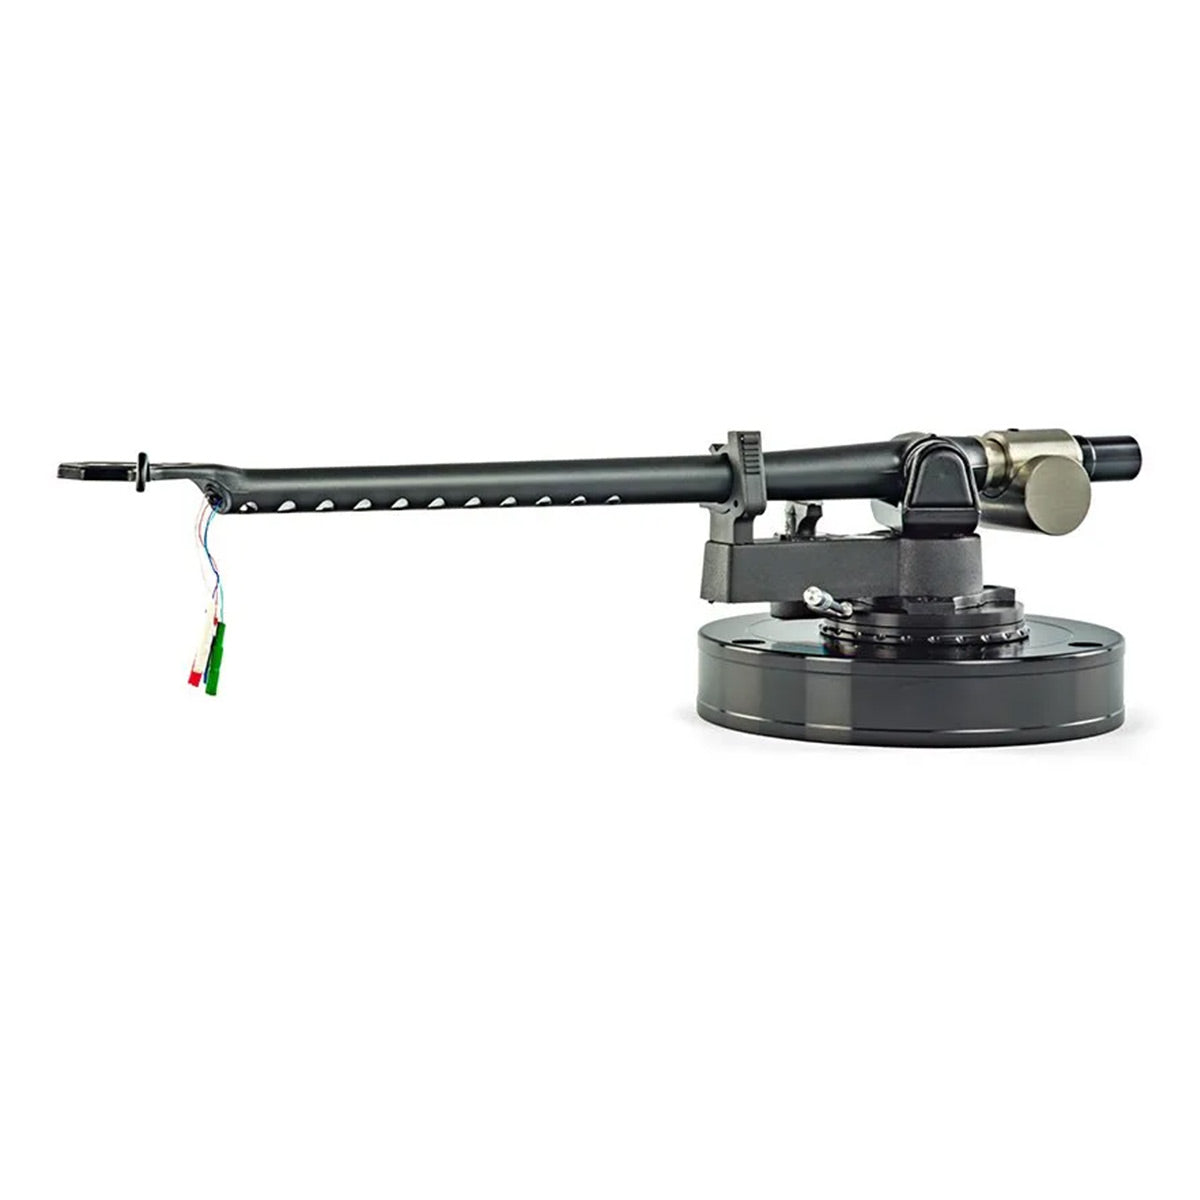 Michell Engineering Gyrodec Turntable with TecnoArm 2 Tonearm